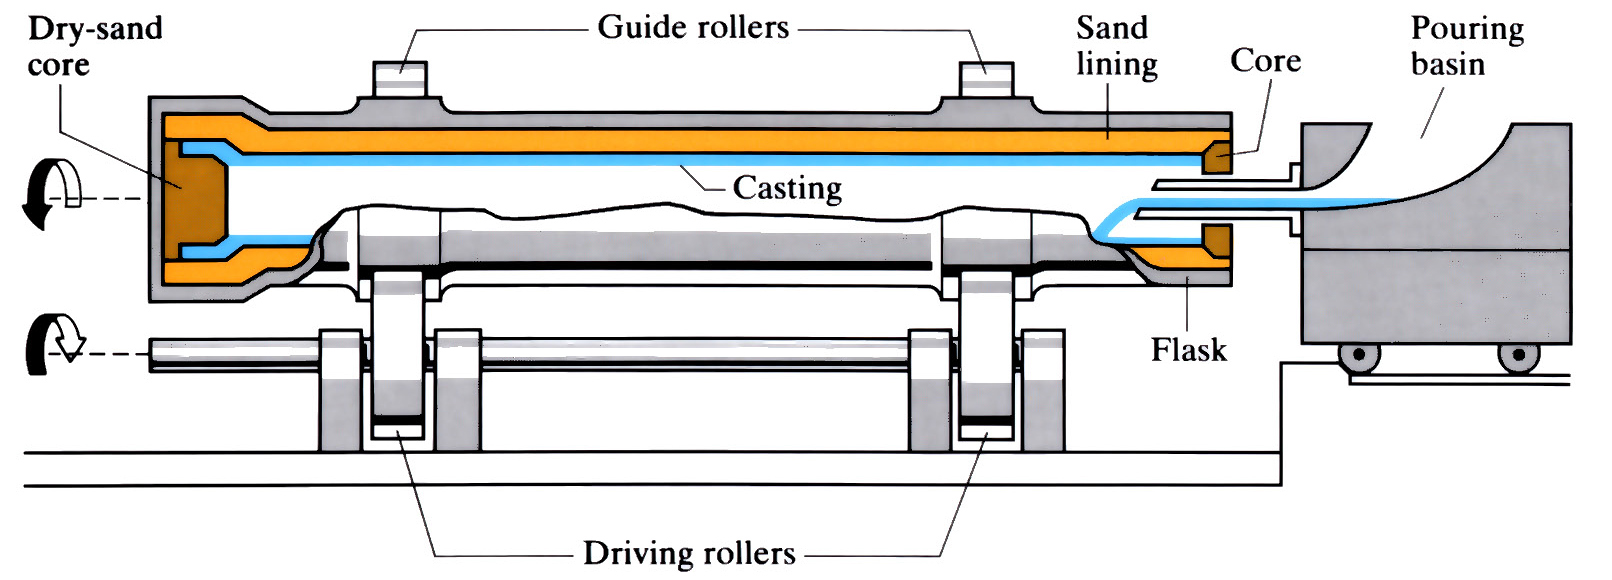 Images to demonstrate Centrifugal casting (see article)